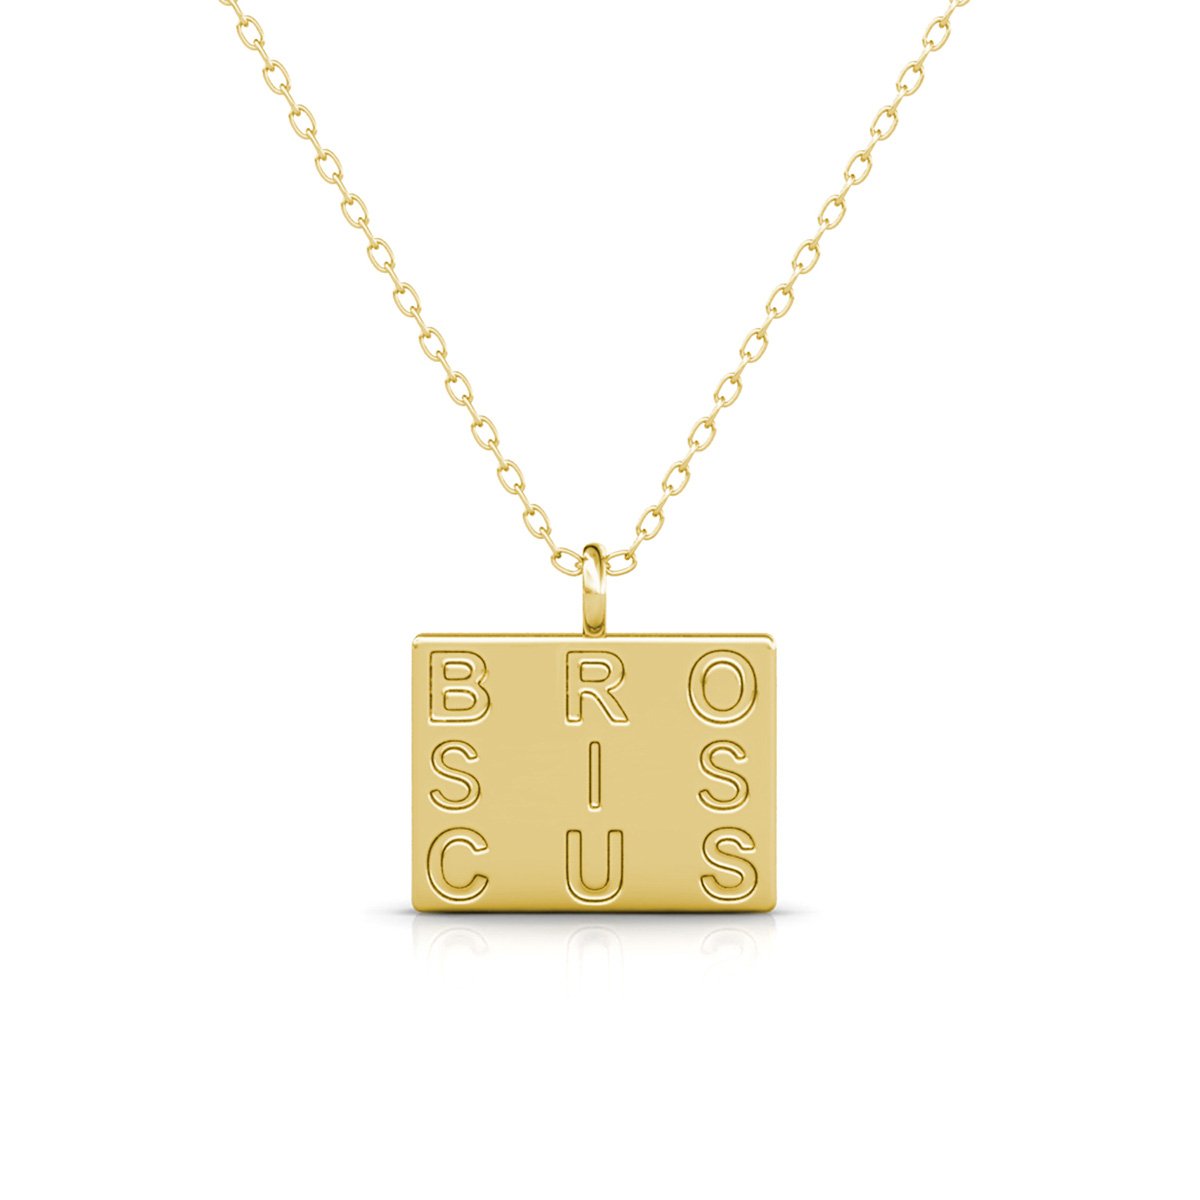 BROSISCUS-Crystal-Gold-Pride-Necklace-18k-Gold-Chain